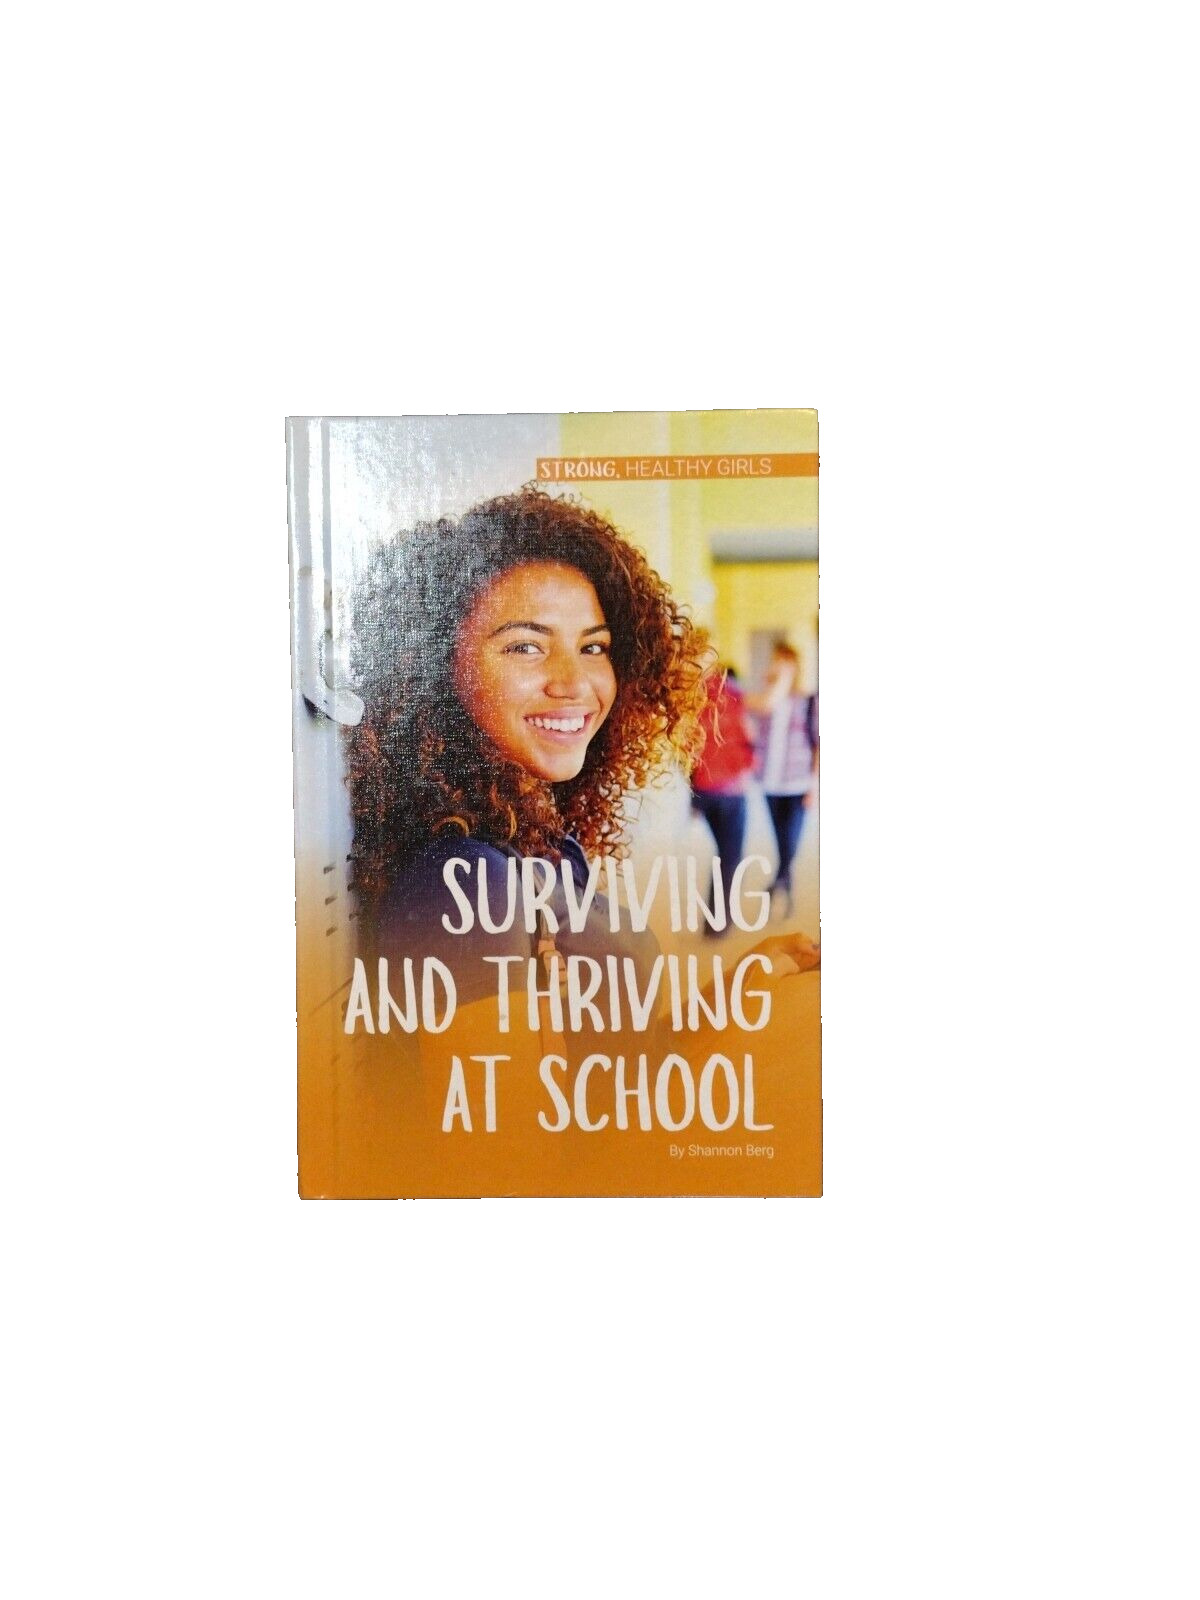 Strong, Healthy Girls Series: Surviving & Thriving at School by Shannon Berg